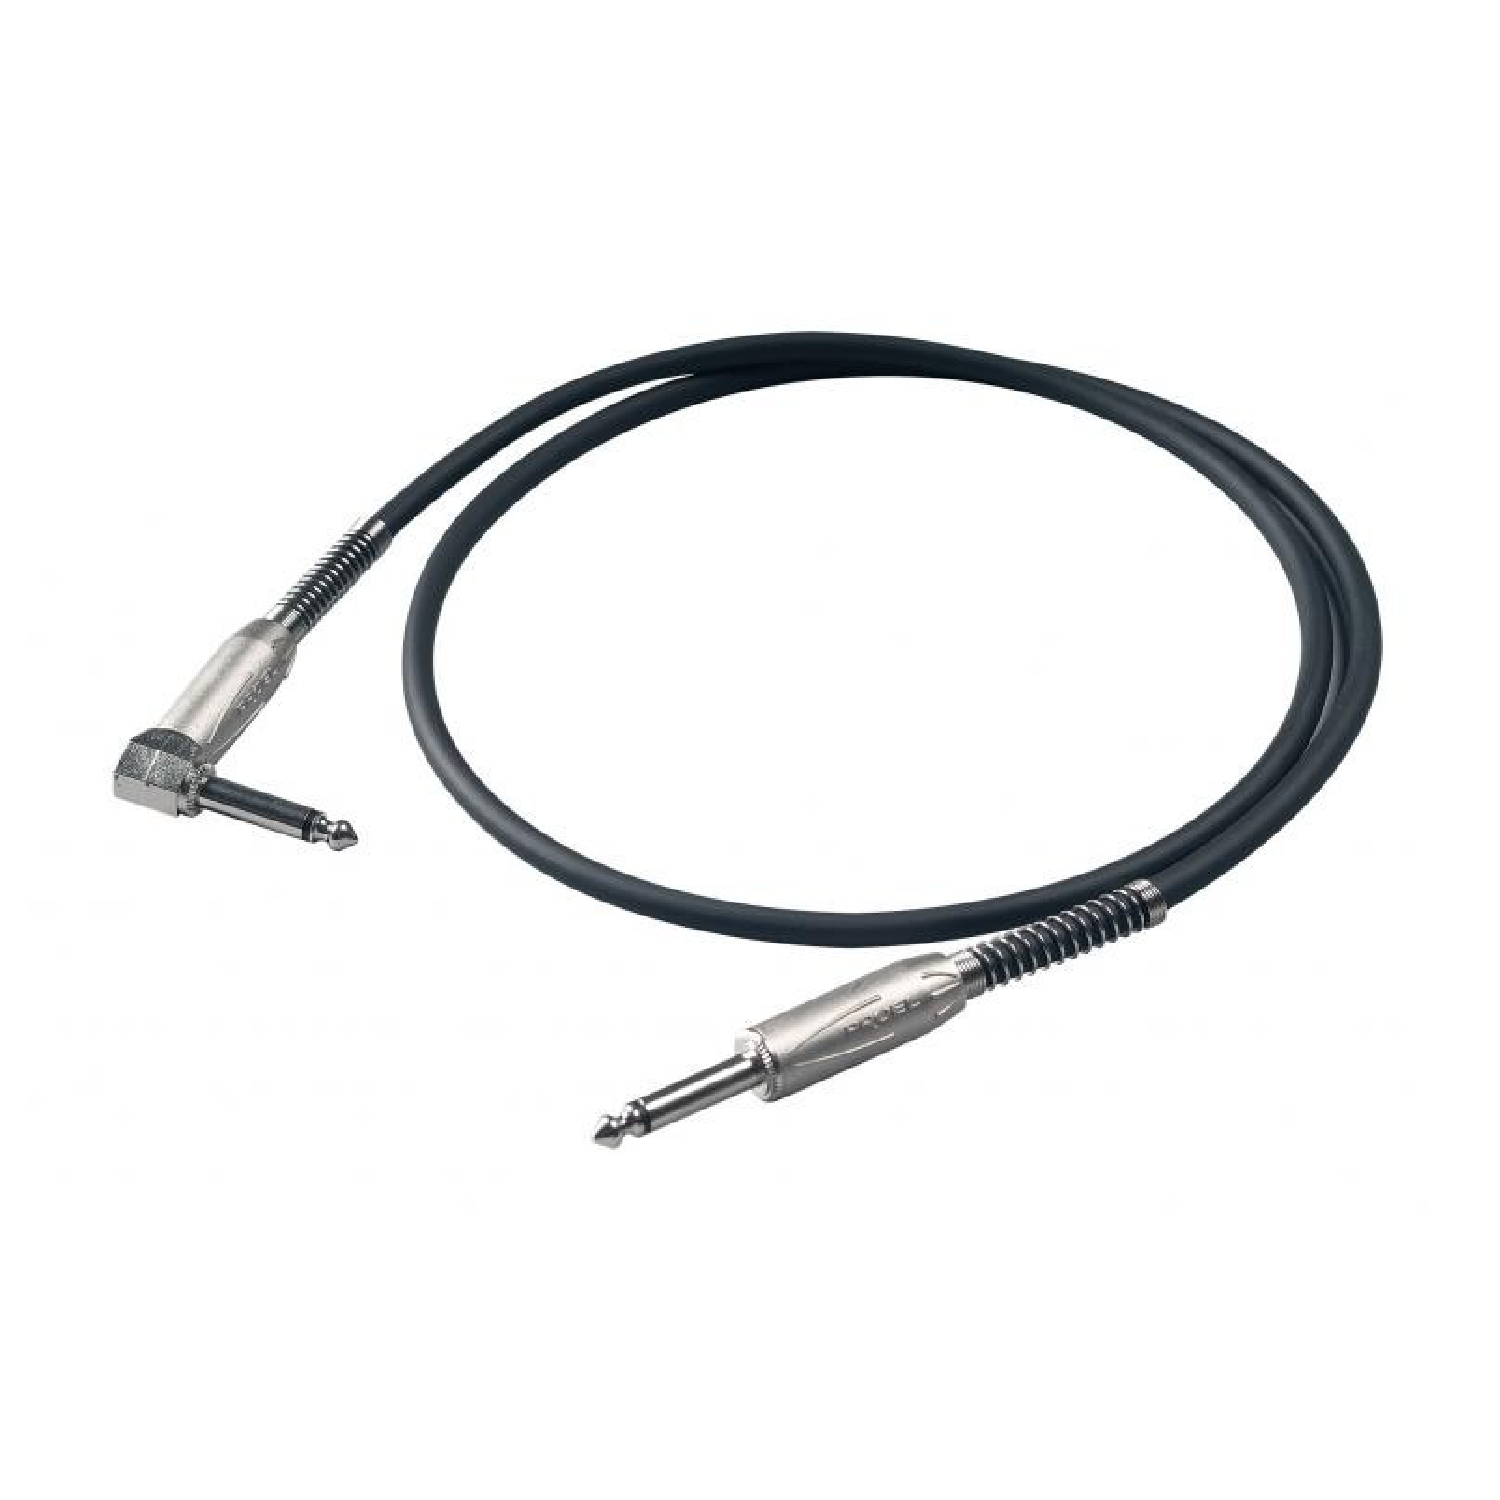 3 Meter Instrument Cable with 6.3 mm Mono Jack to 6.3 mm Mono Jack   BULK 120LU3